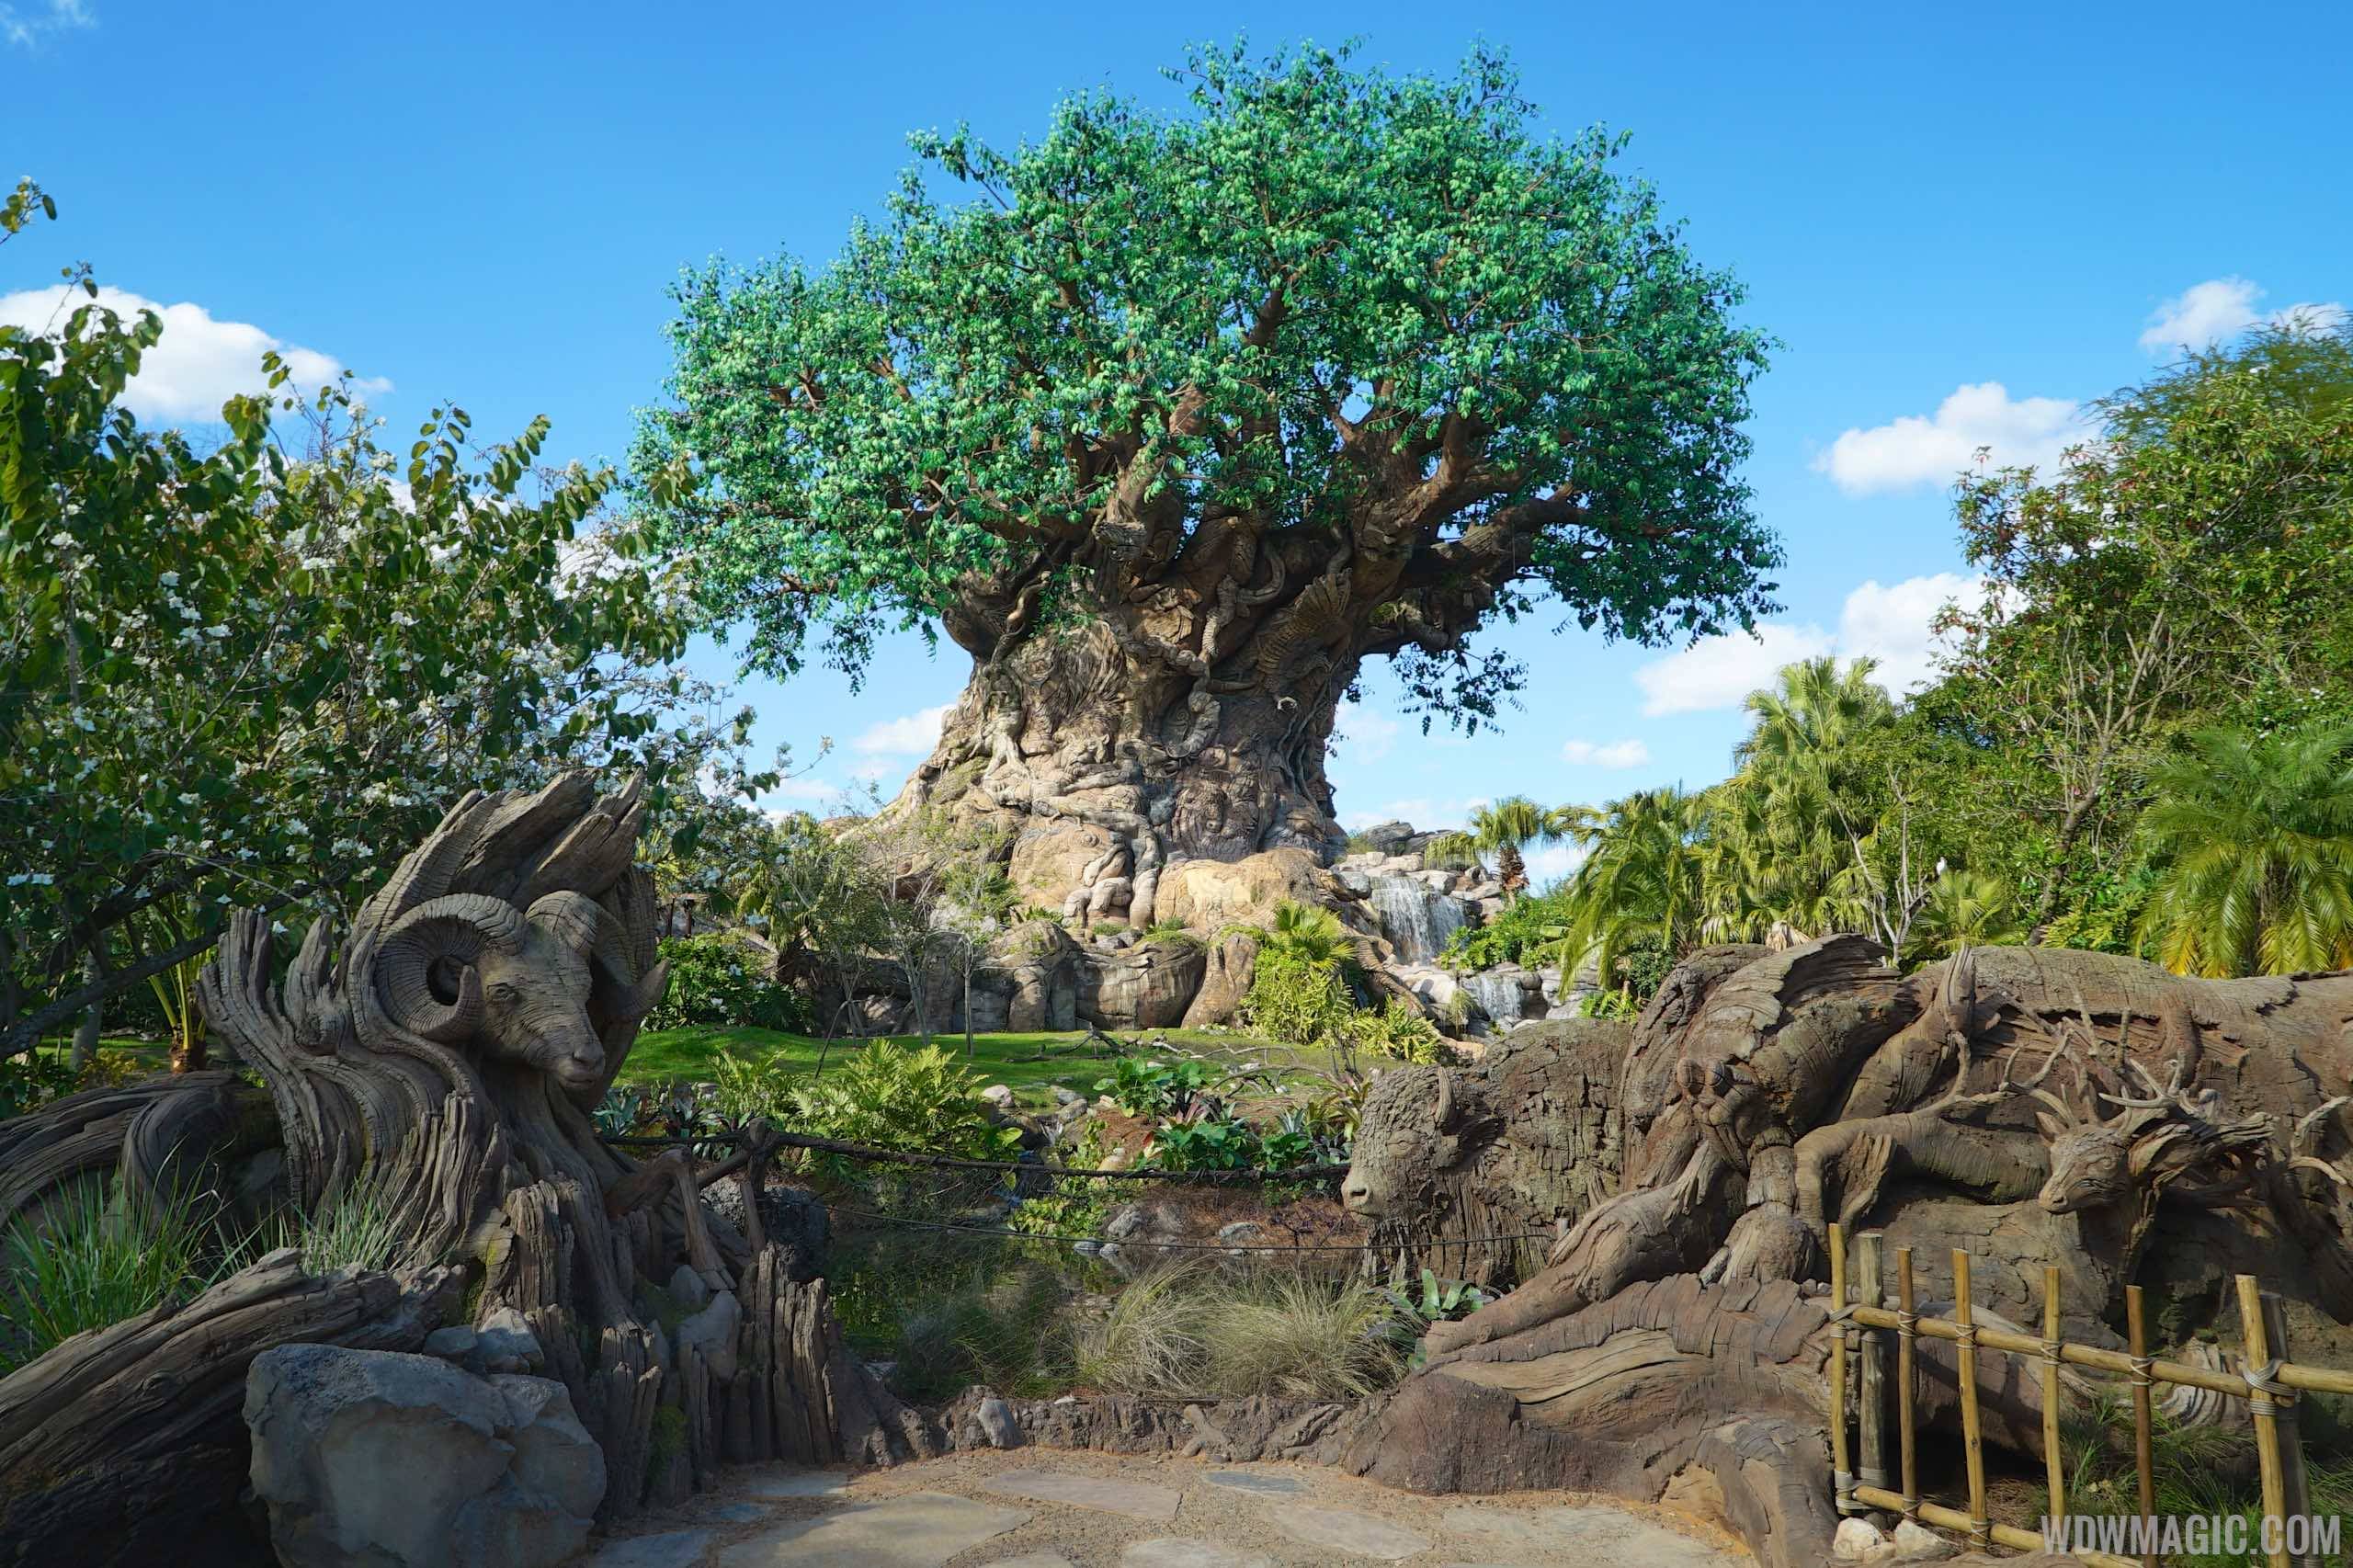 New roots at the Tree of Life